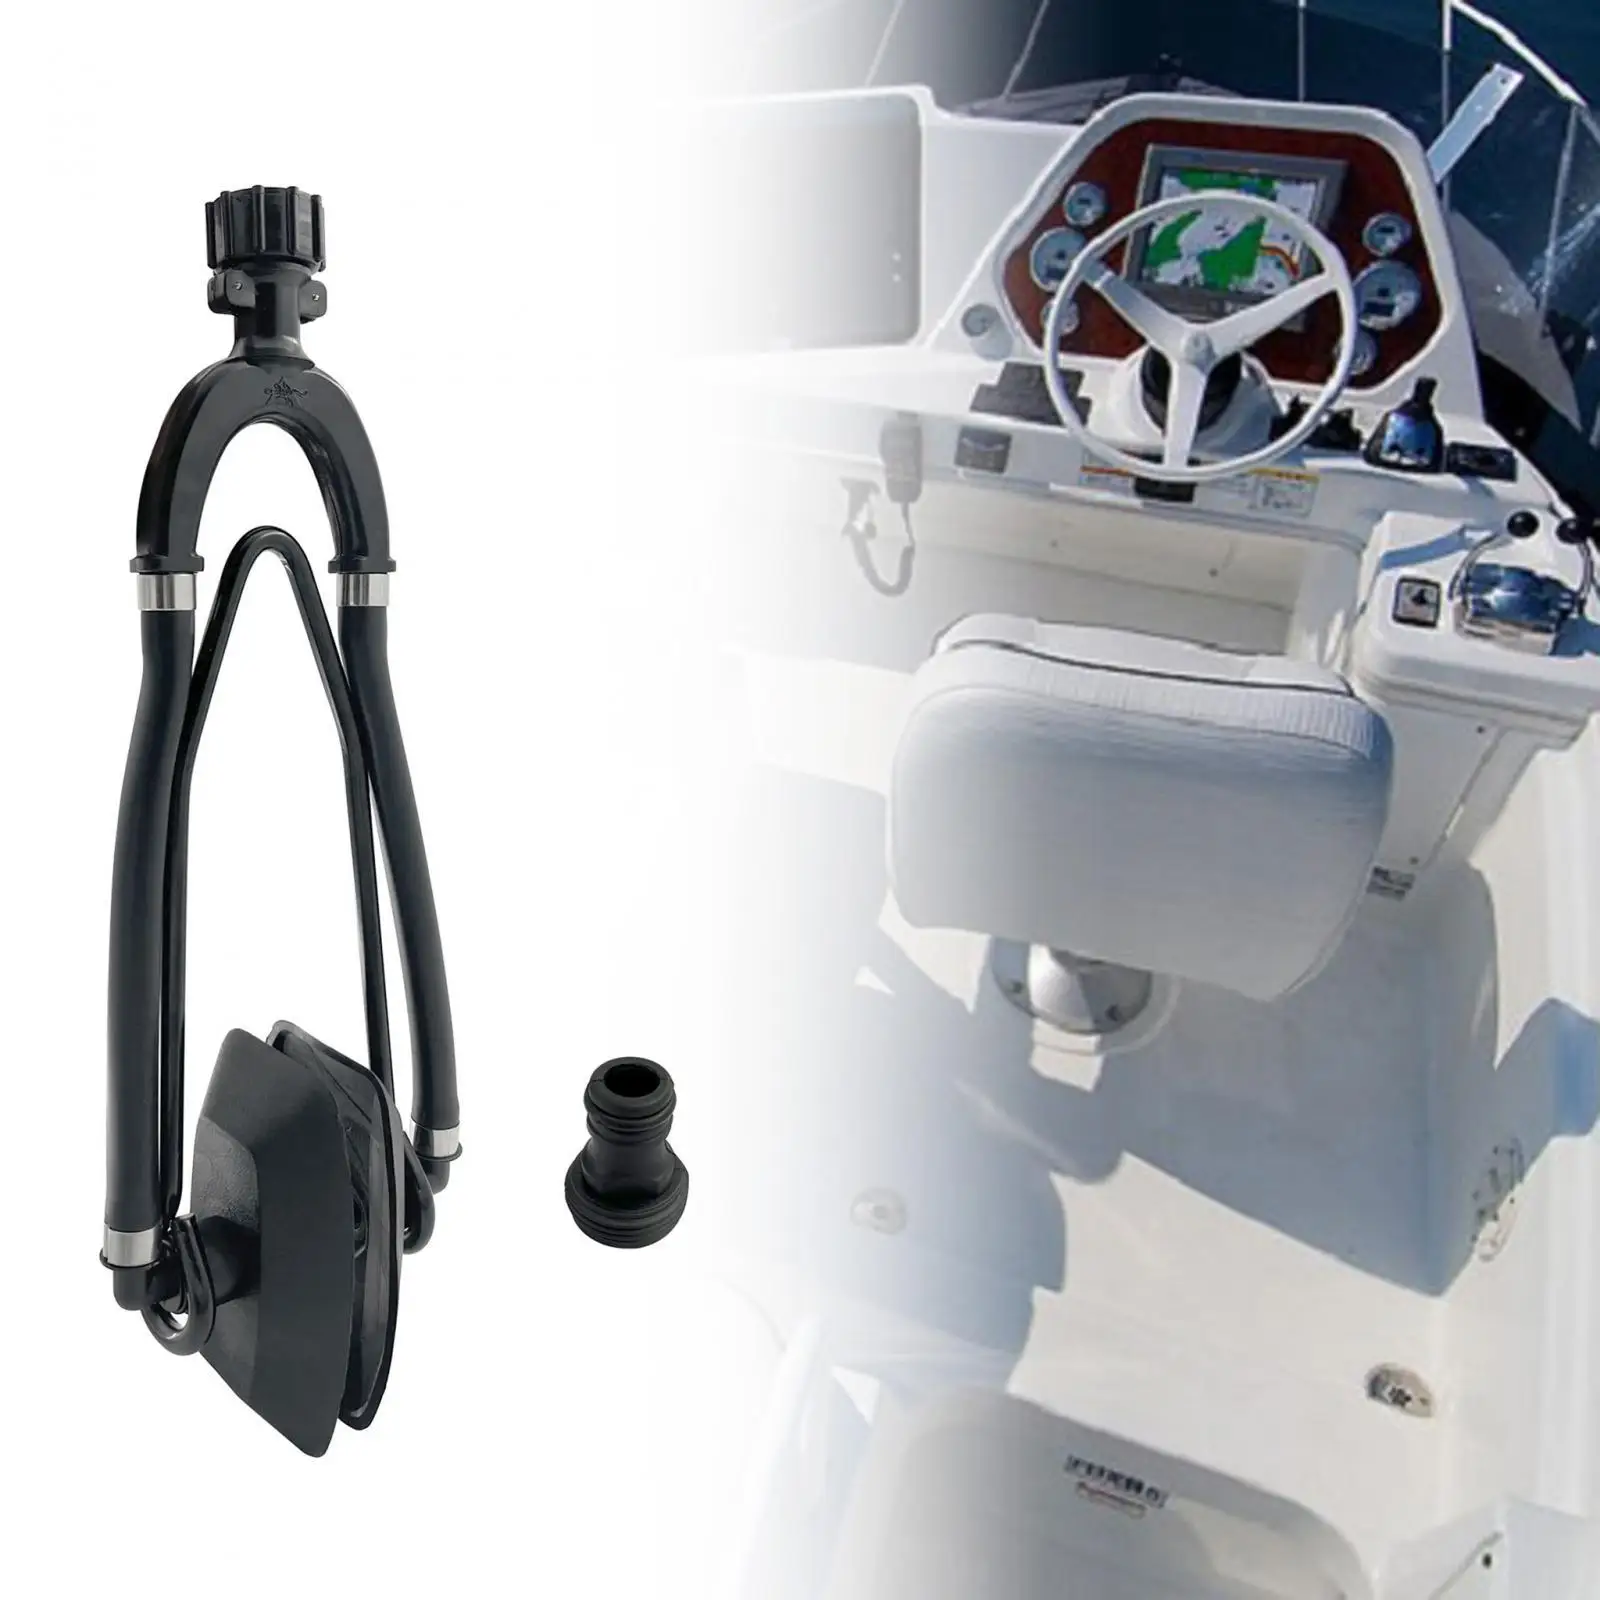 Motor Flusher for Boats Universal Outboard Motor Flushing Outboard Washer Boat Ear Muffs Dual Water feed Motor Flusher